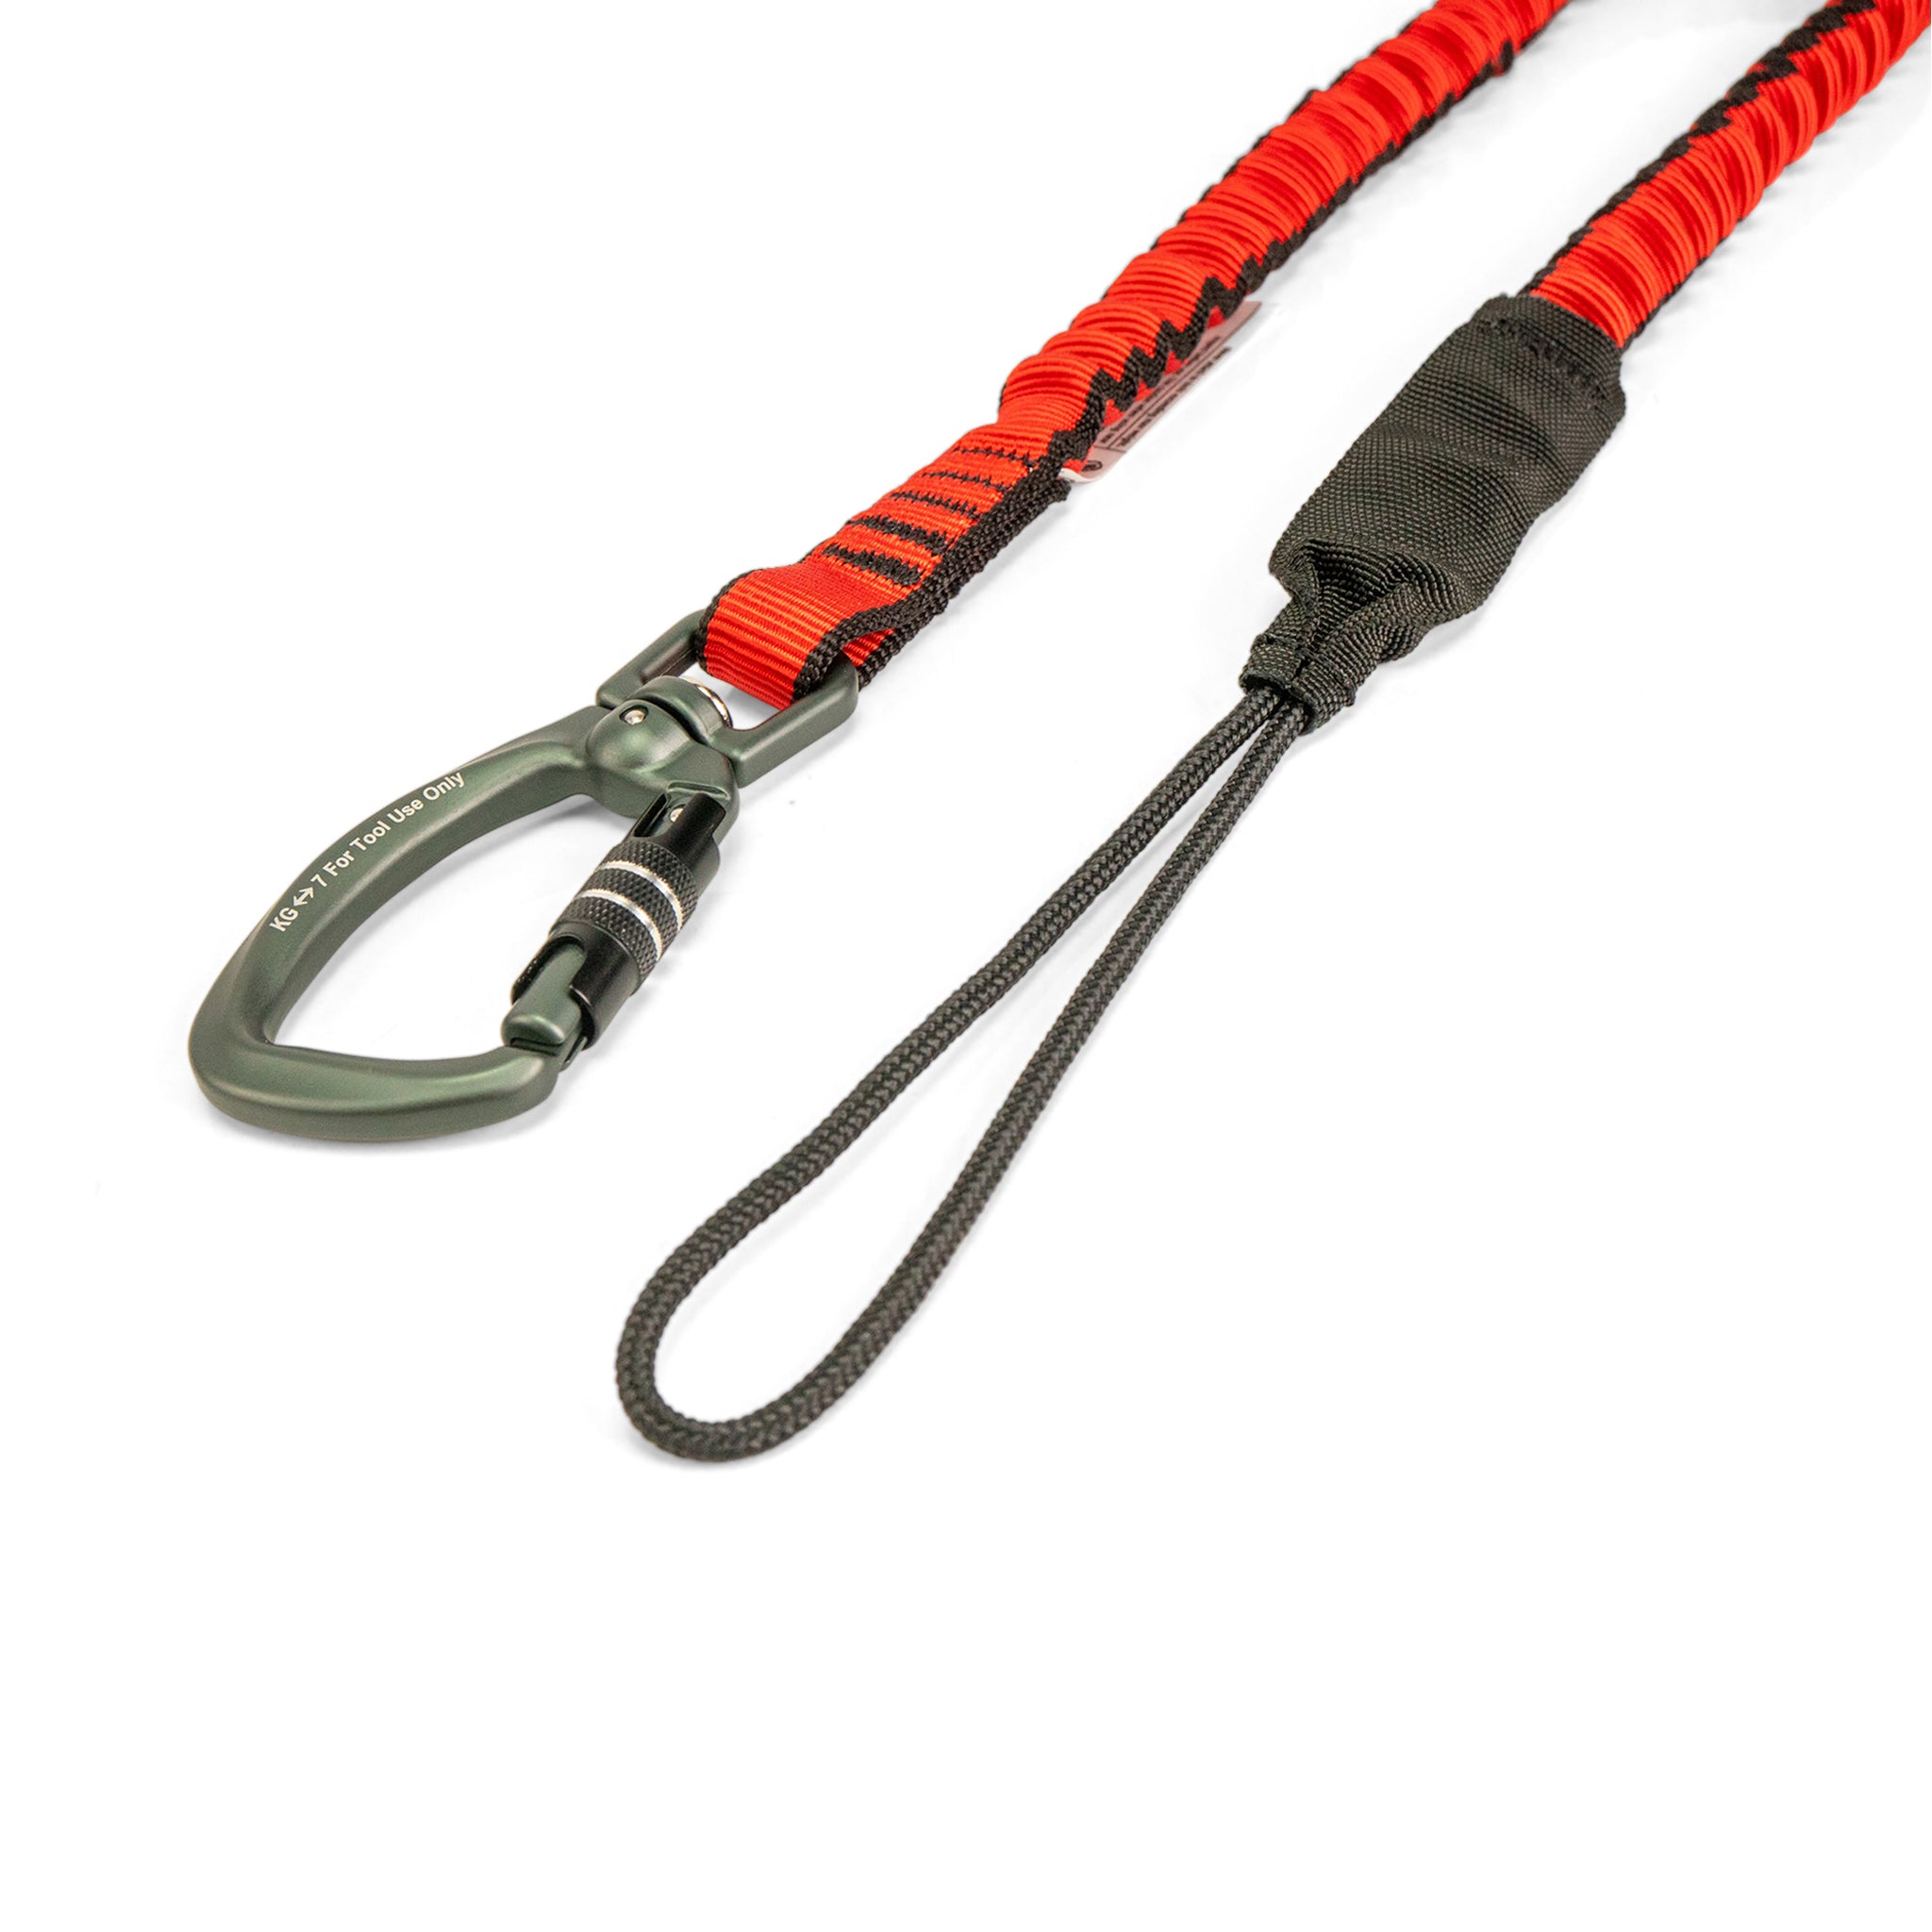 GRIPPS® Bungee Tether Dual-Action Swivel Carabiner - 7.0kg / 15lb